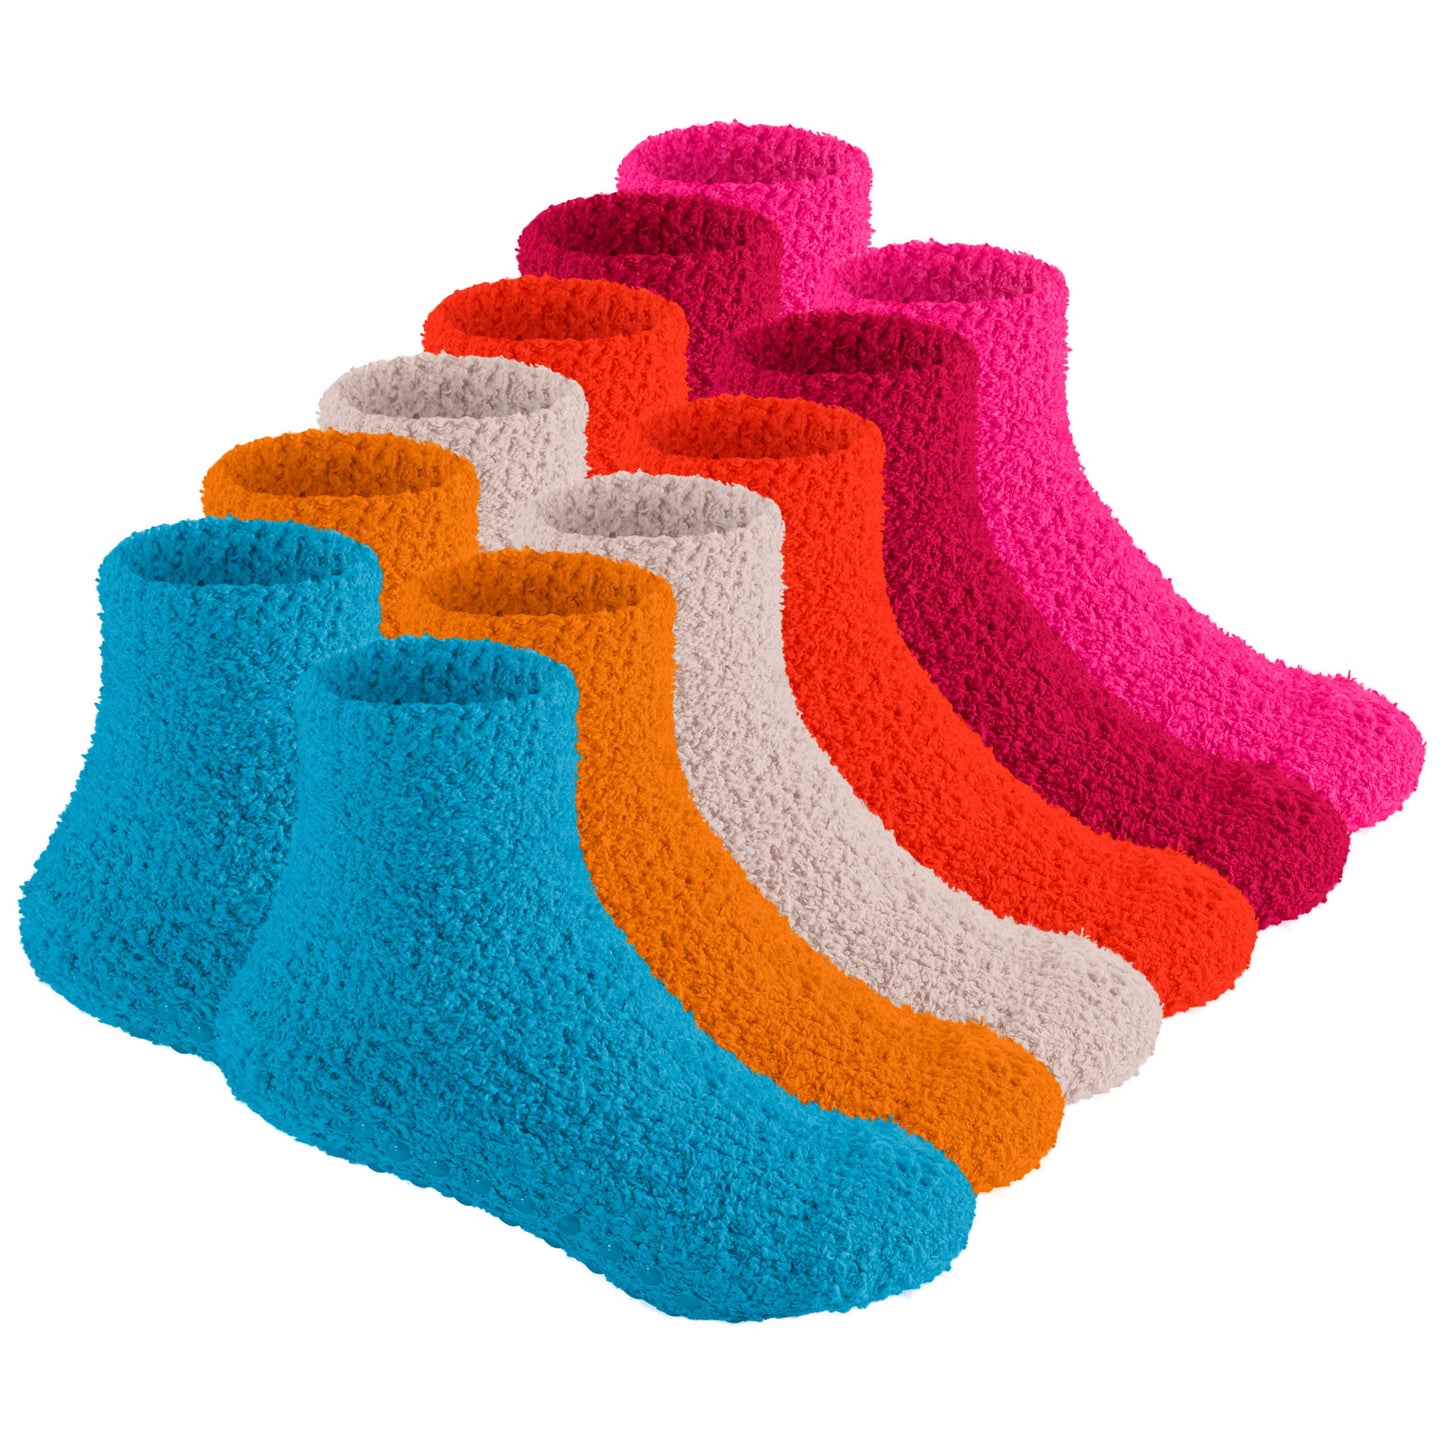 Fuzzy Socks for Kids - 6 Pairs